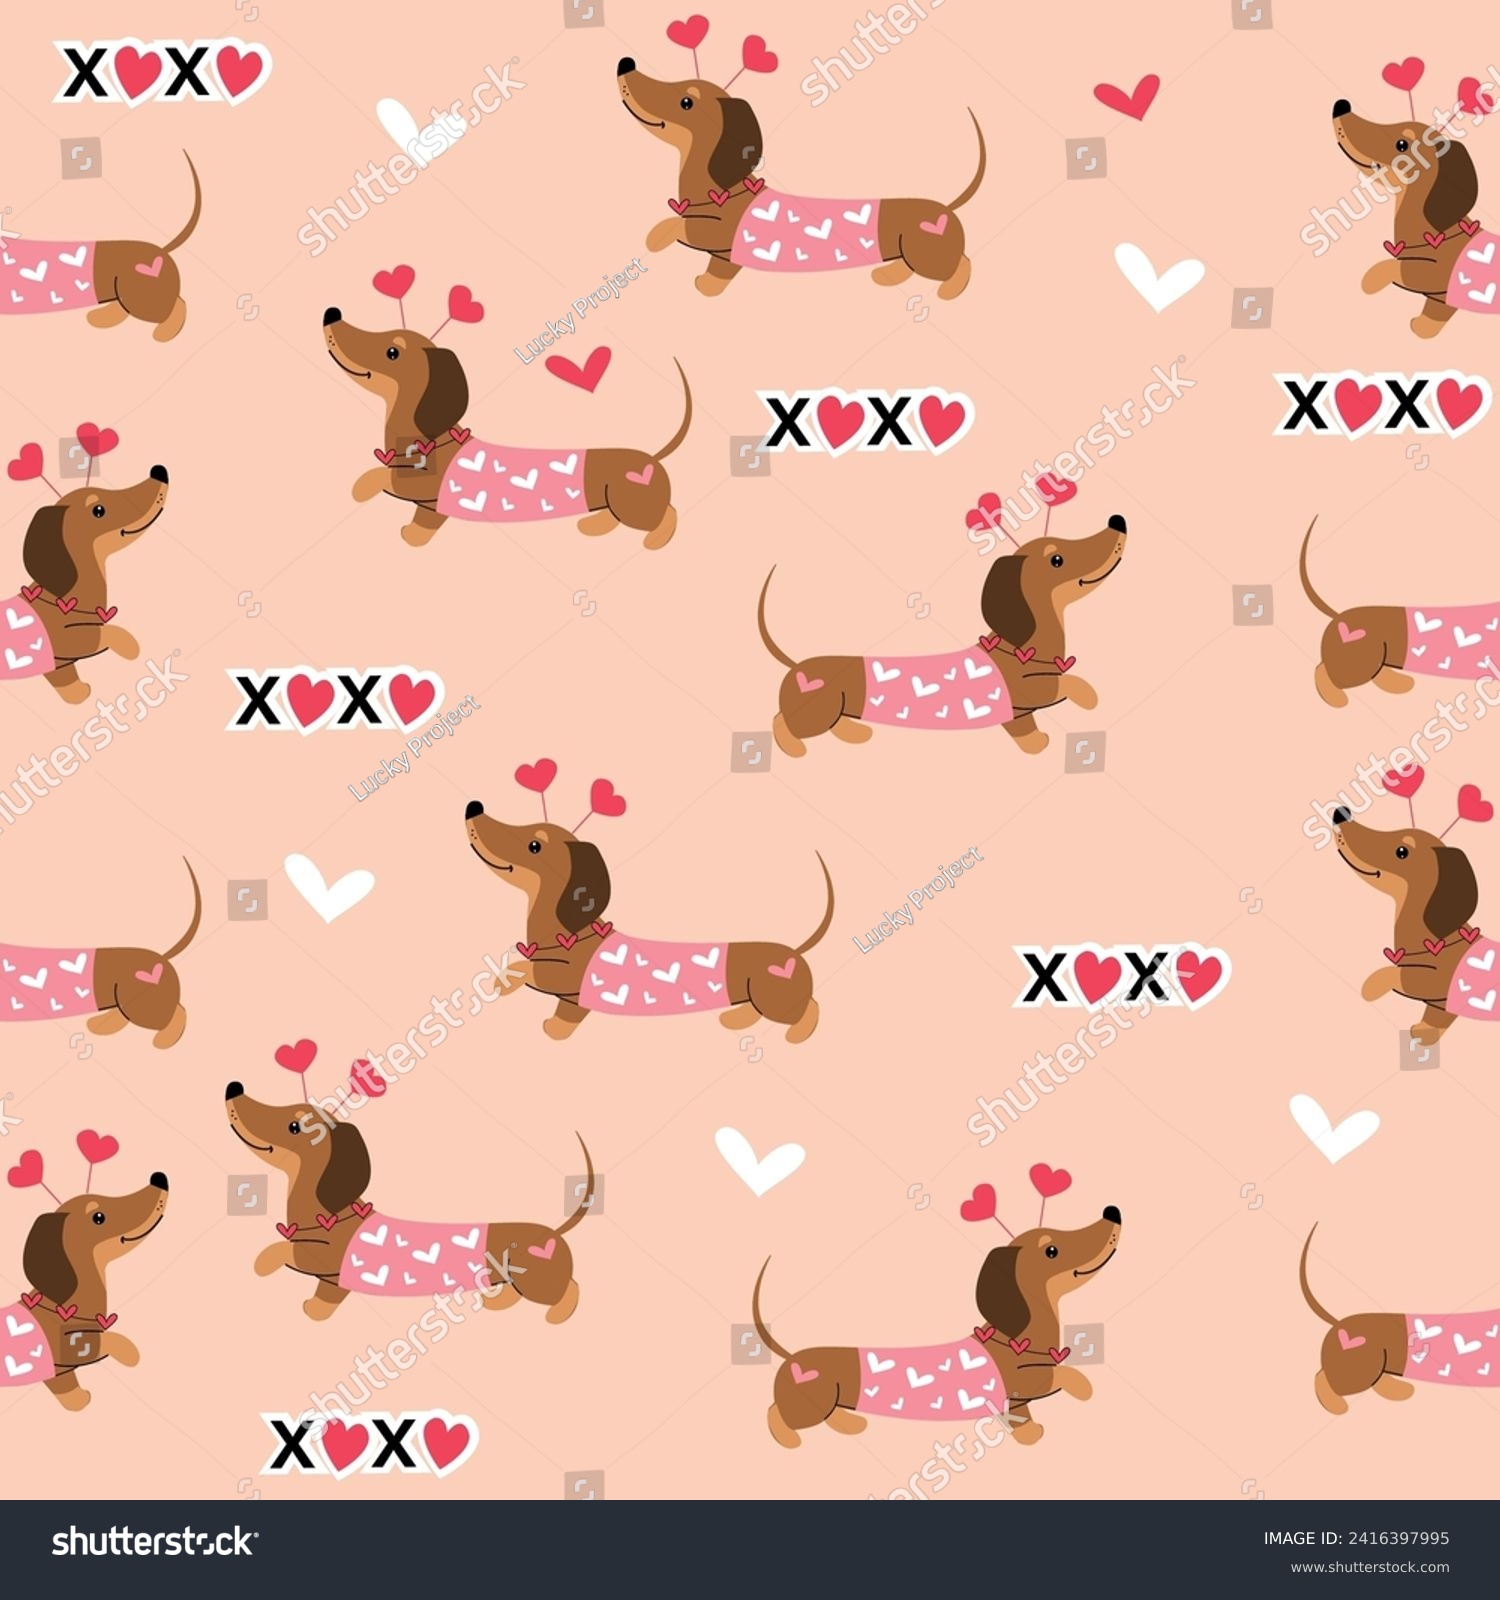 SVG of Dachshund dogs and hearts on a pink background seamless pattern. Vector illustration doodle style. valentine's day card. Love animals svg